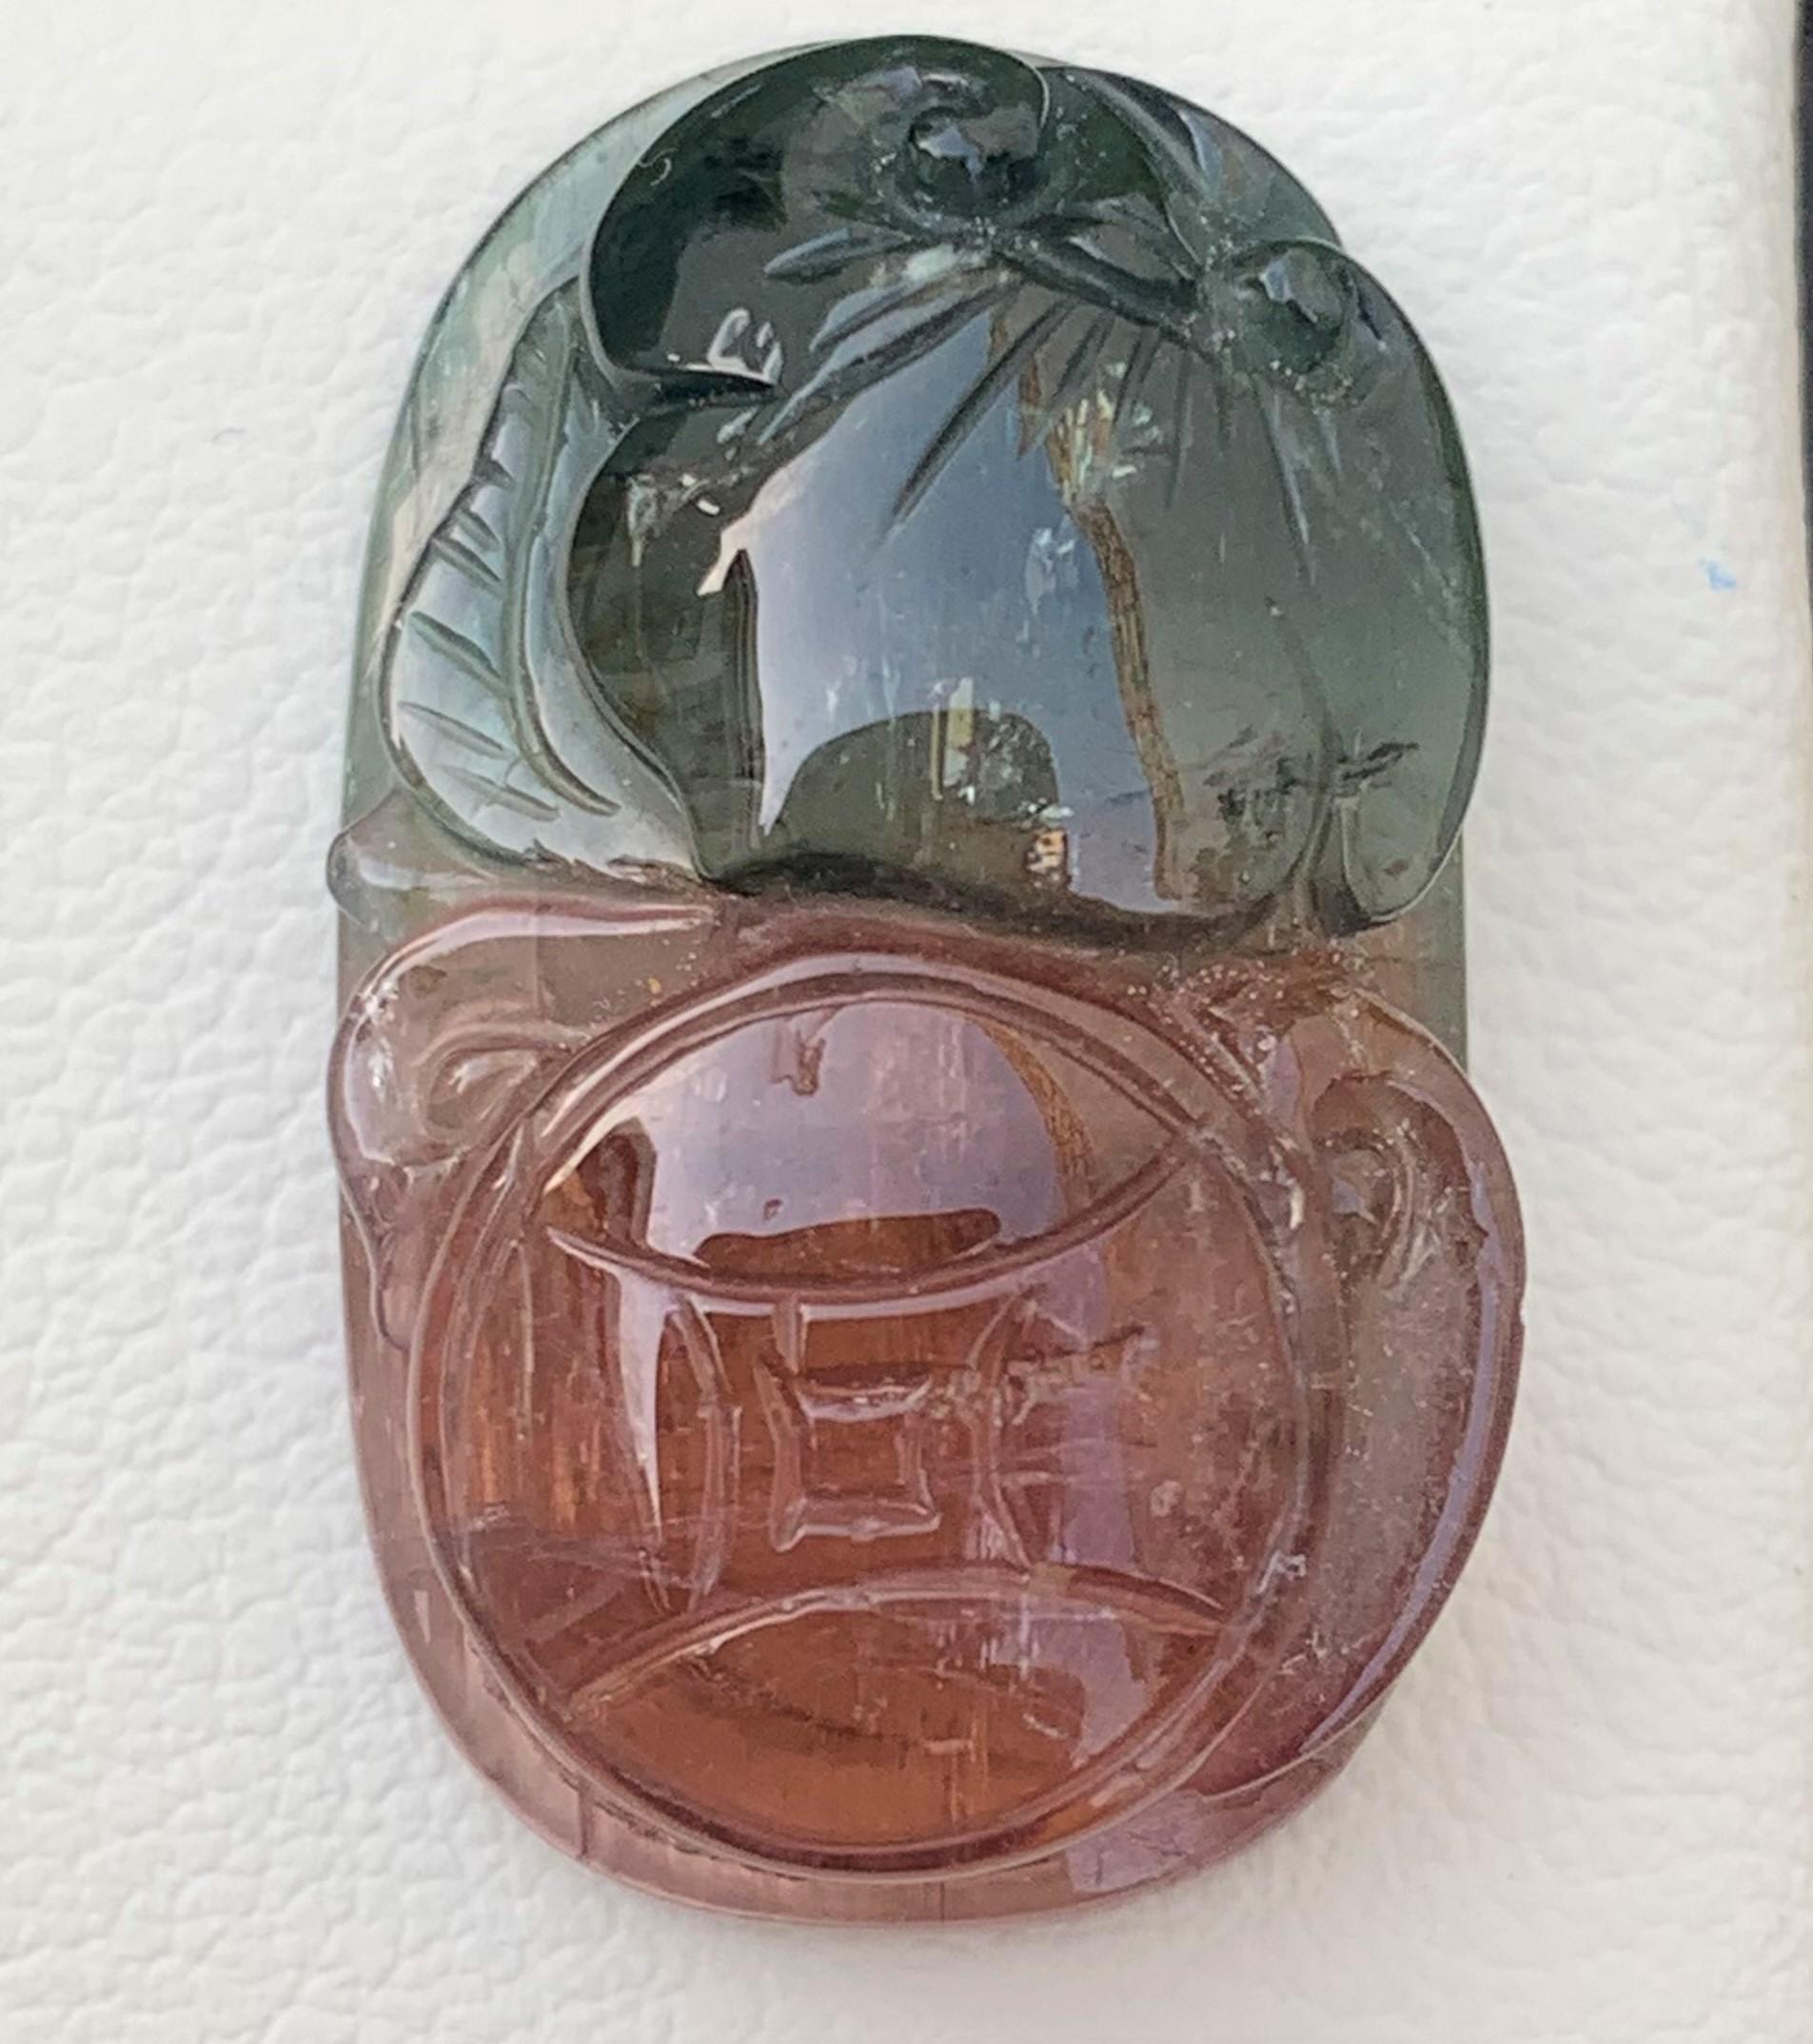 Unique Bi-Color Tourmaline Carving From Madagascar Africa 
Weight: 42.00Carats
Dimension: 2.9 x 1.7 x 0.9 Cm
Origin: Africa
Color: Peach & Green
Shape: Carving
Quality: AAA

Bicolor tourmaline is connected to the heart chakra, which makes it